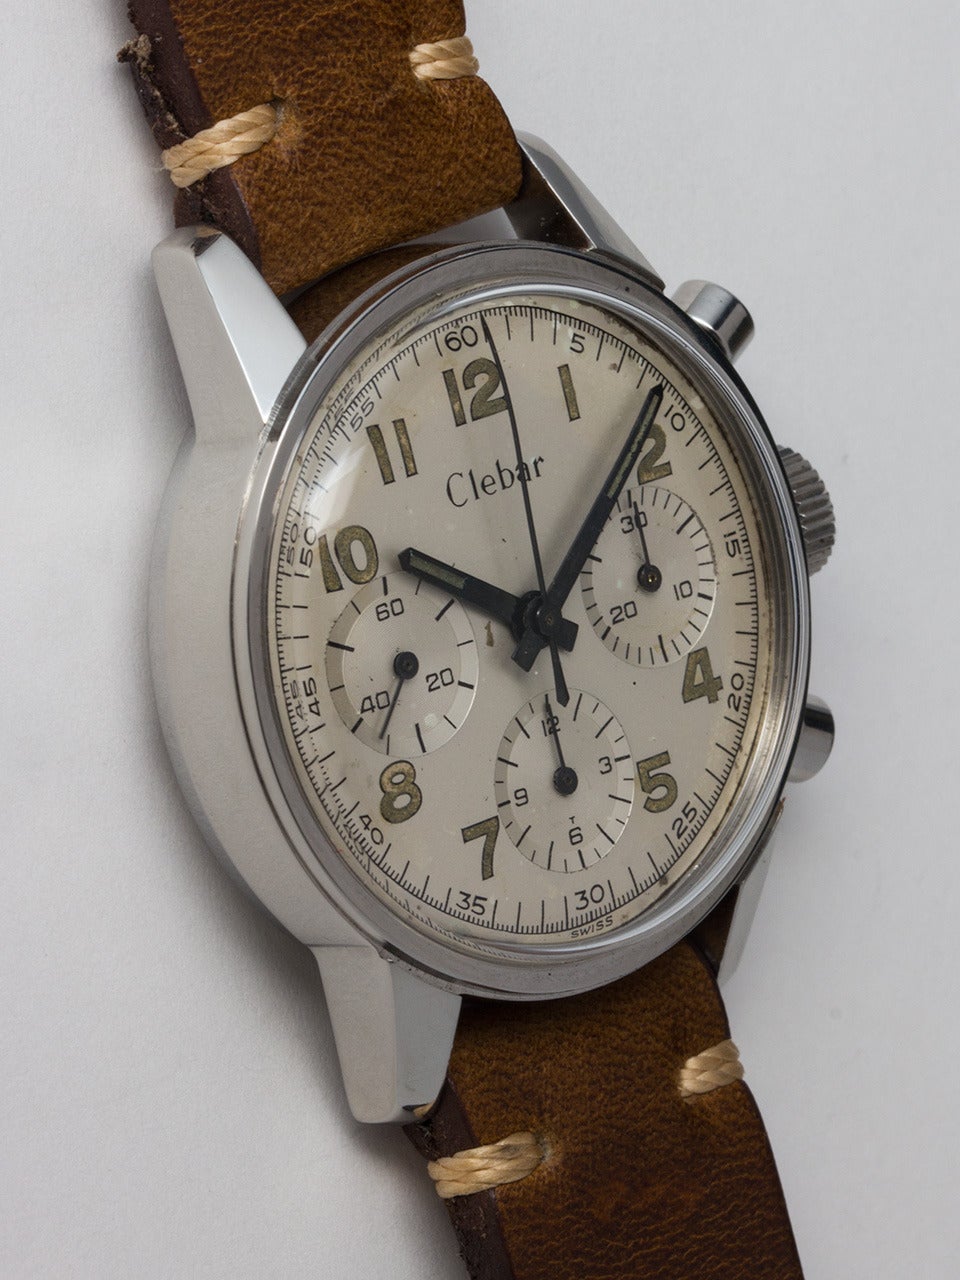 Clebar Stainless Steel Chrongraph wristwatch, circa 1950s. Great looking model featuring a 36 X 44mm screw back case with heavy lugs, wide bezel and round pushers. With a beautiful original two-tone matte silvered dial with luminous Arabic indexes